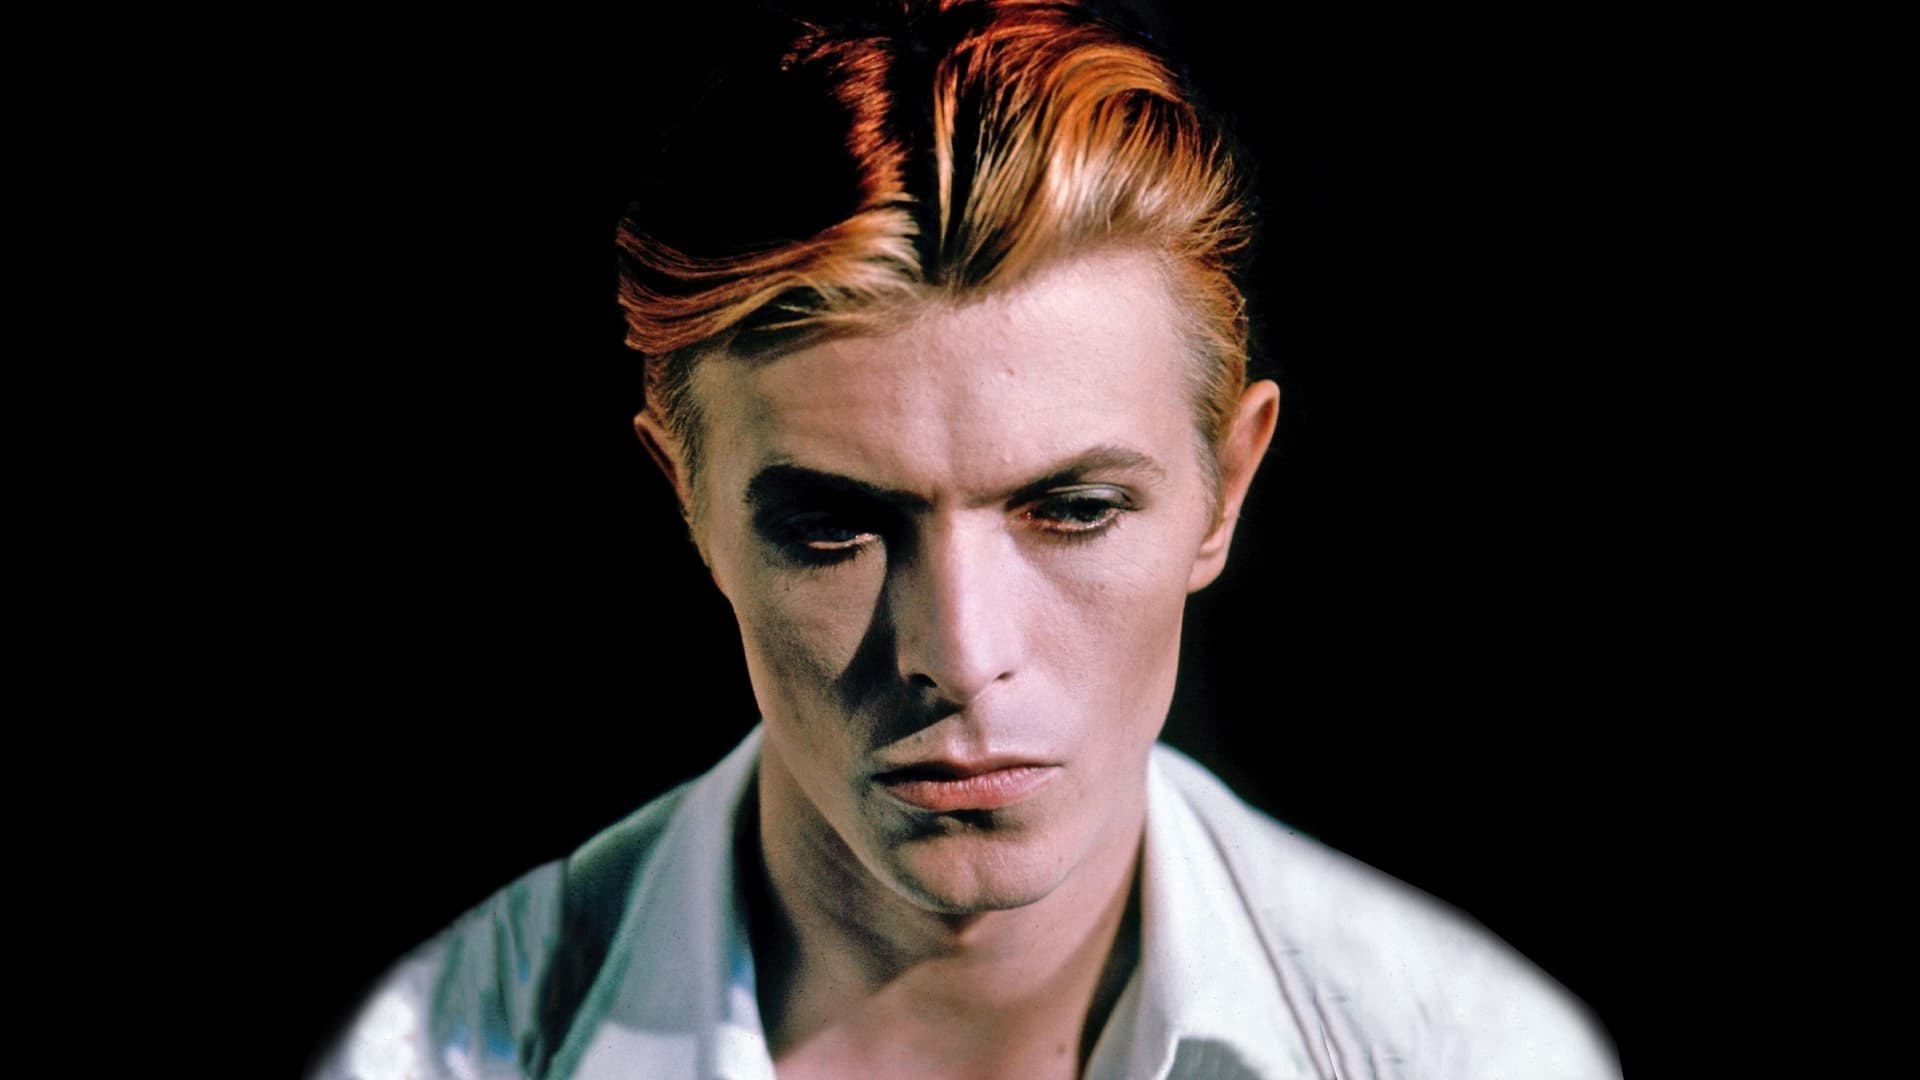 David Bowie – The Man Who Fell to Earth